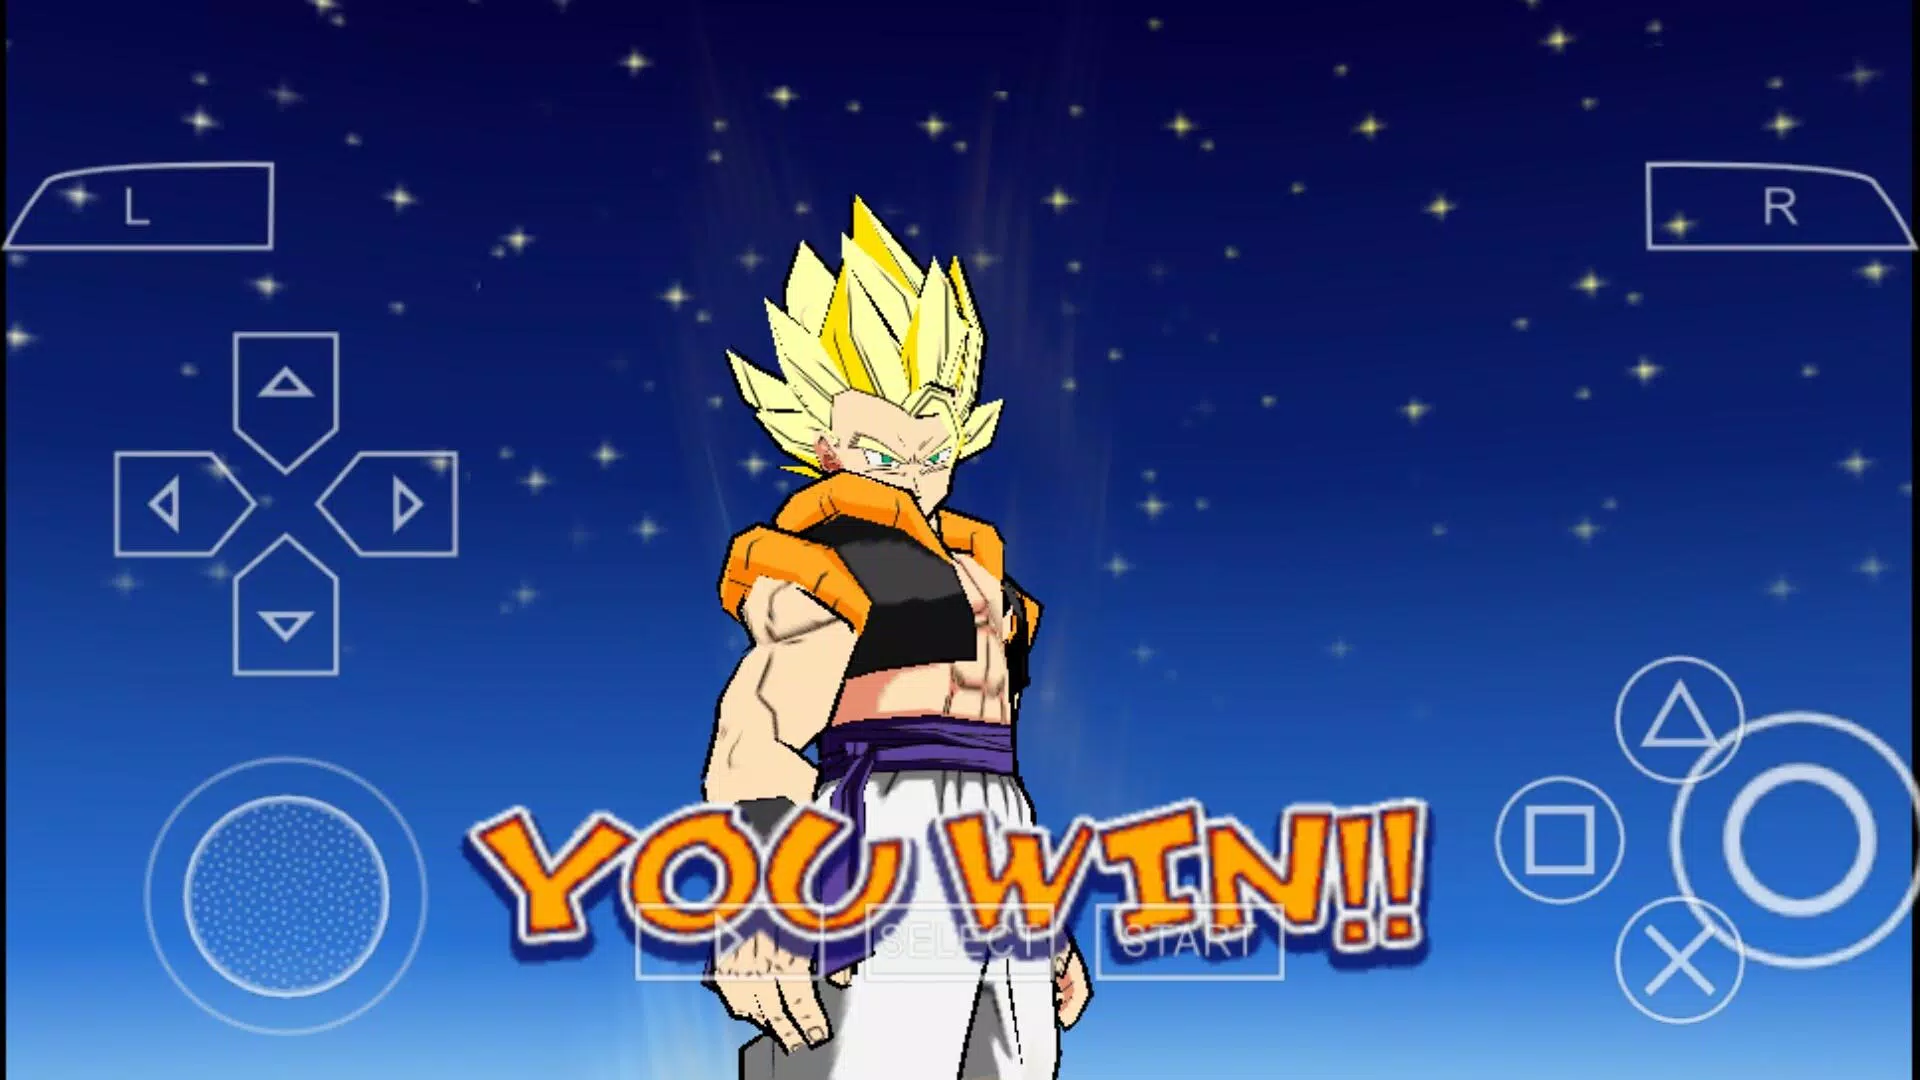 Dragon Ball Z - APK Download for Android